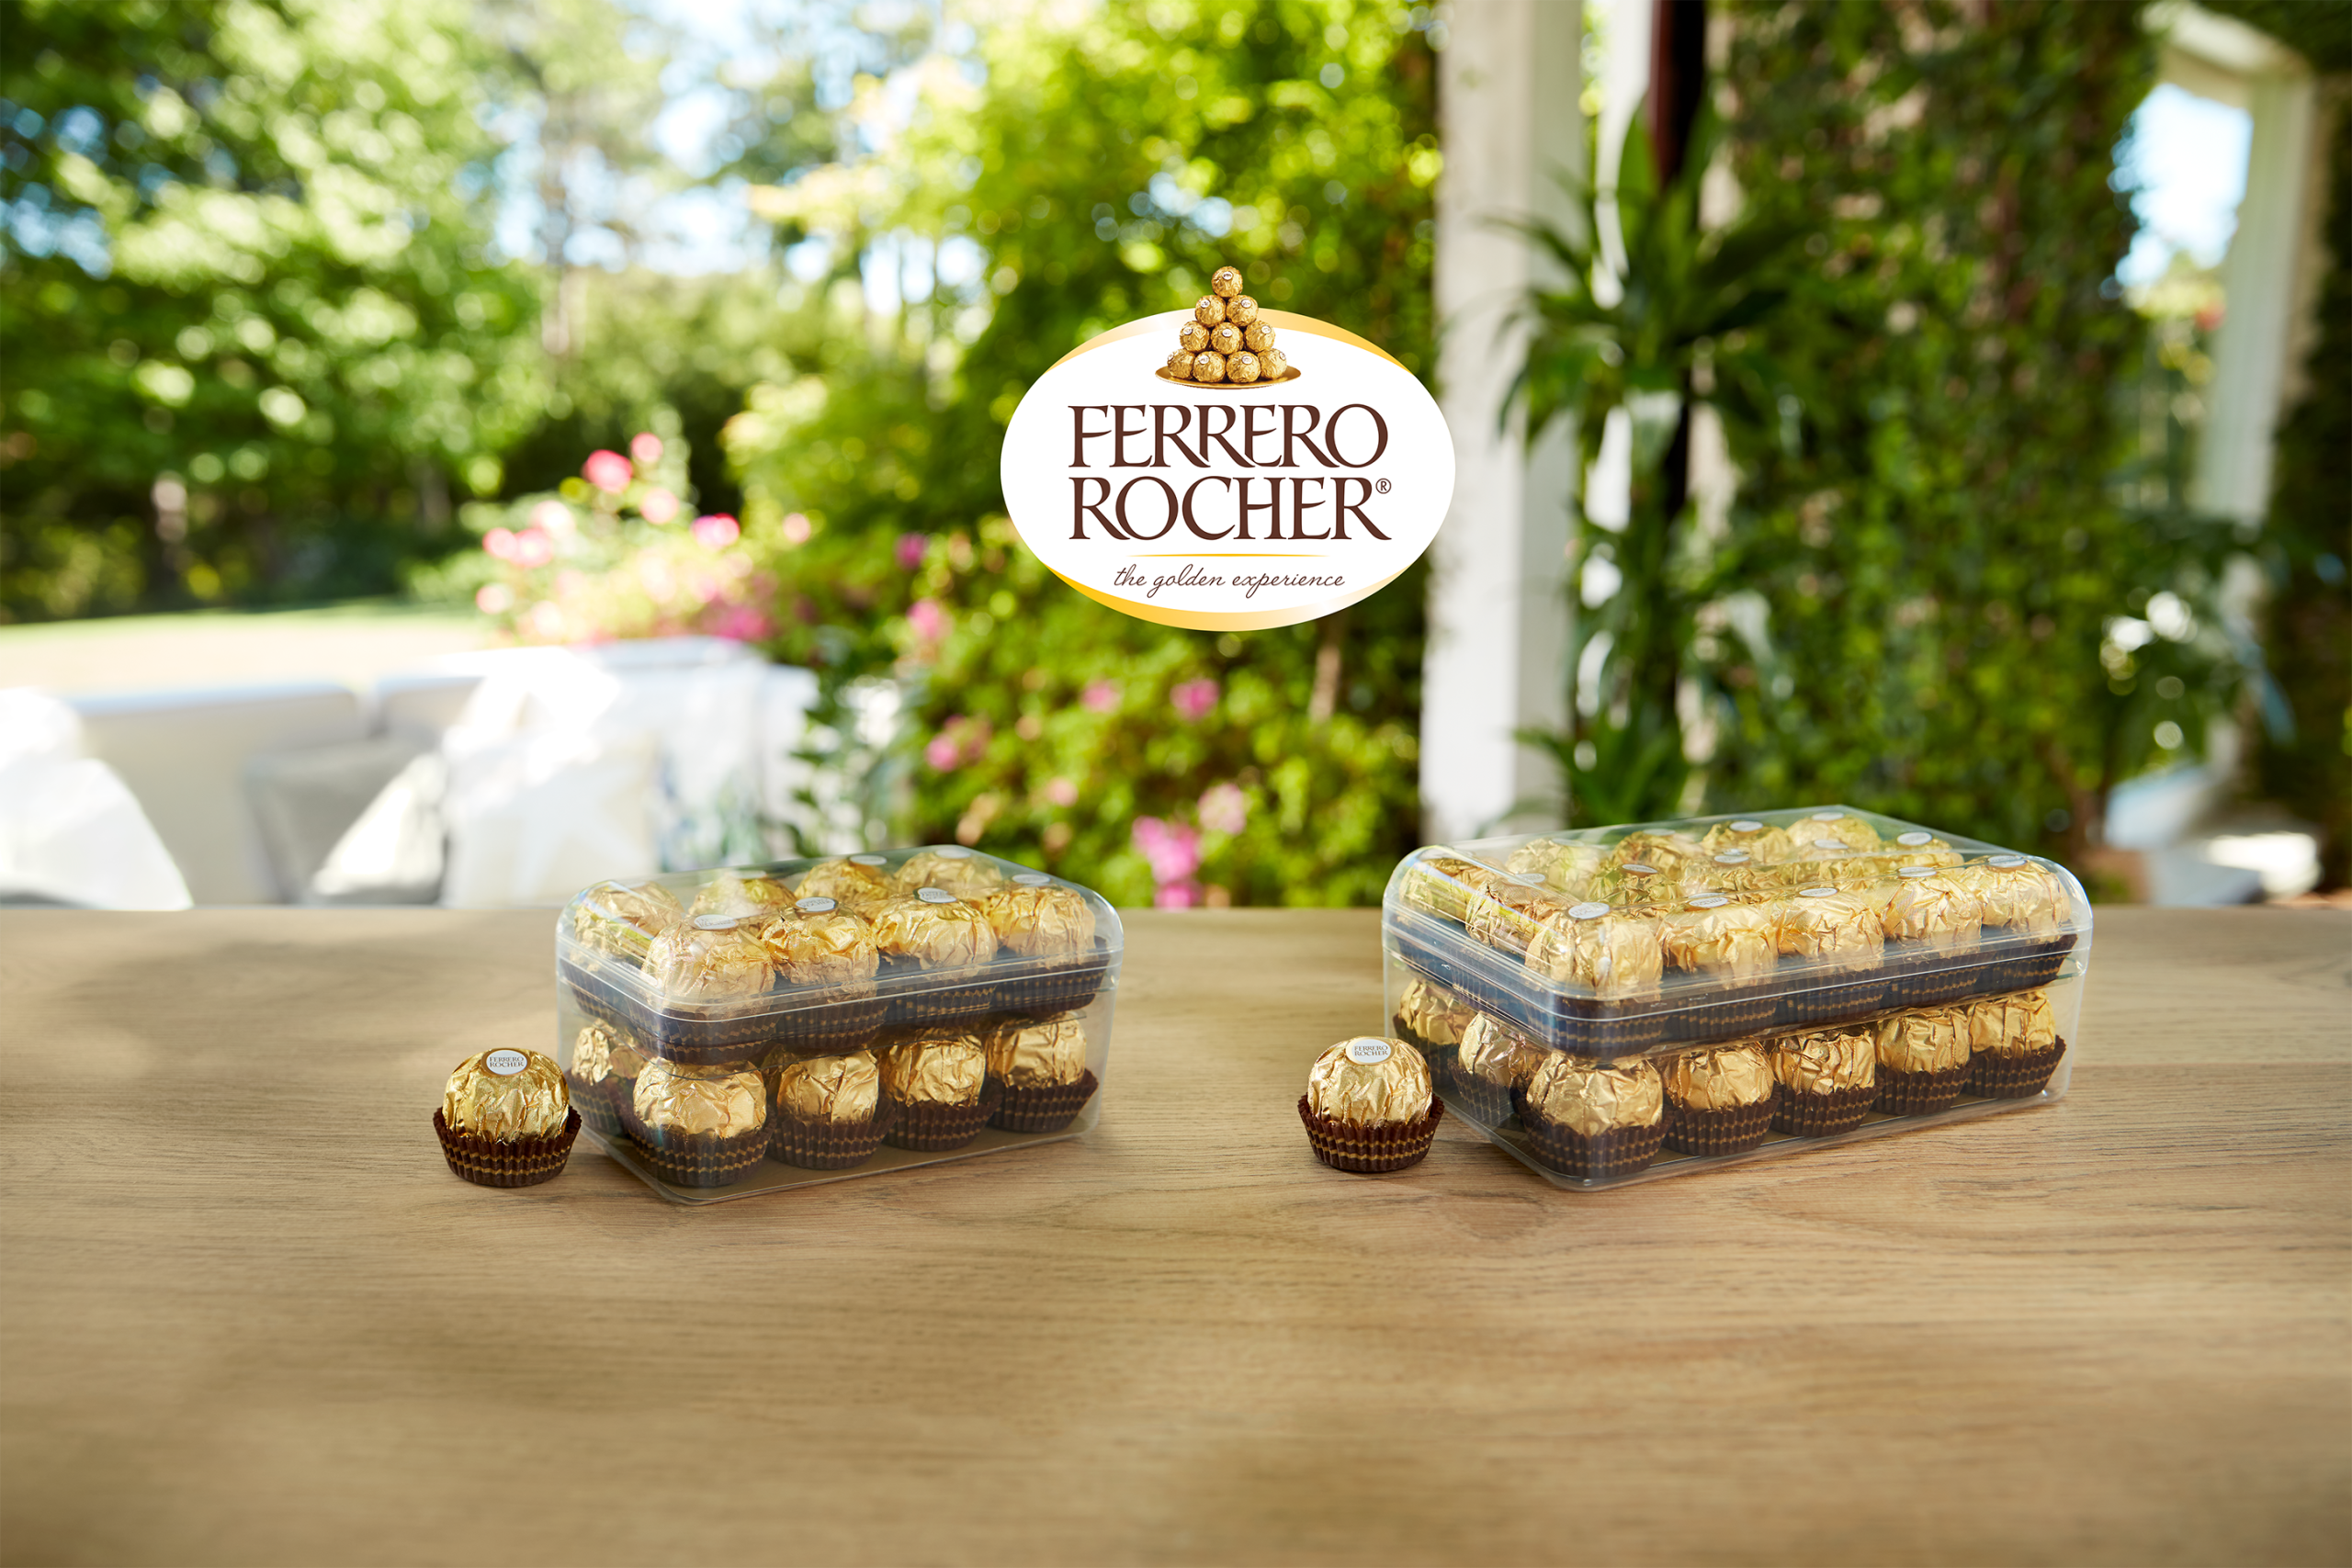 Ferrero introduces new recyclable box for its iconic range